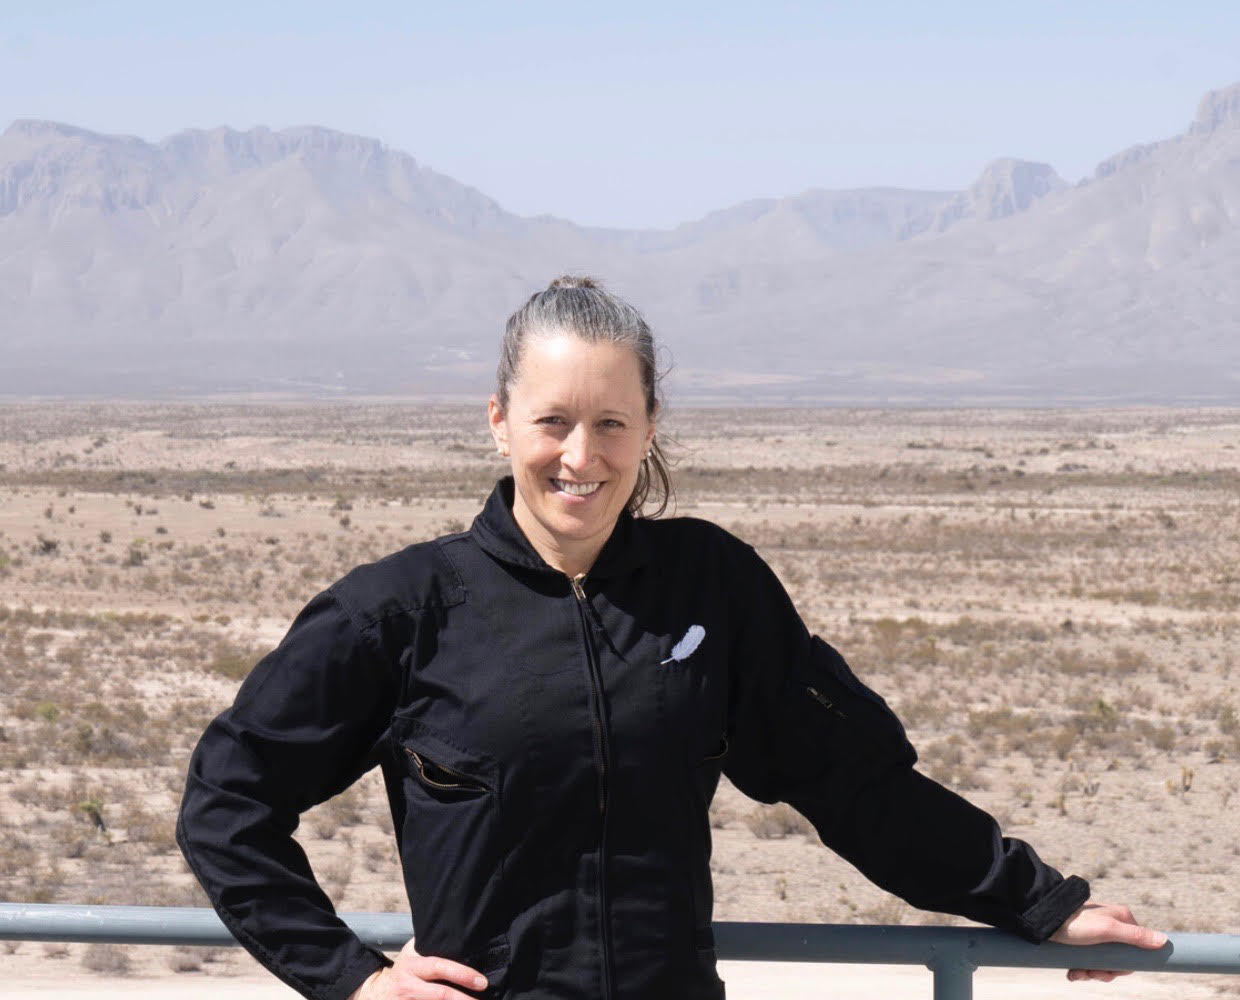 A woman in a black jacket leans against a railing with the Texas desert and mountains behind